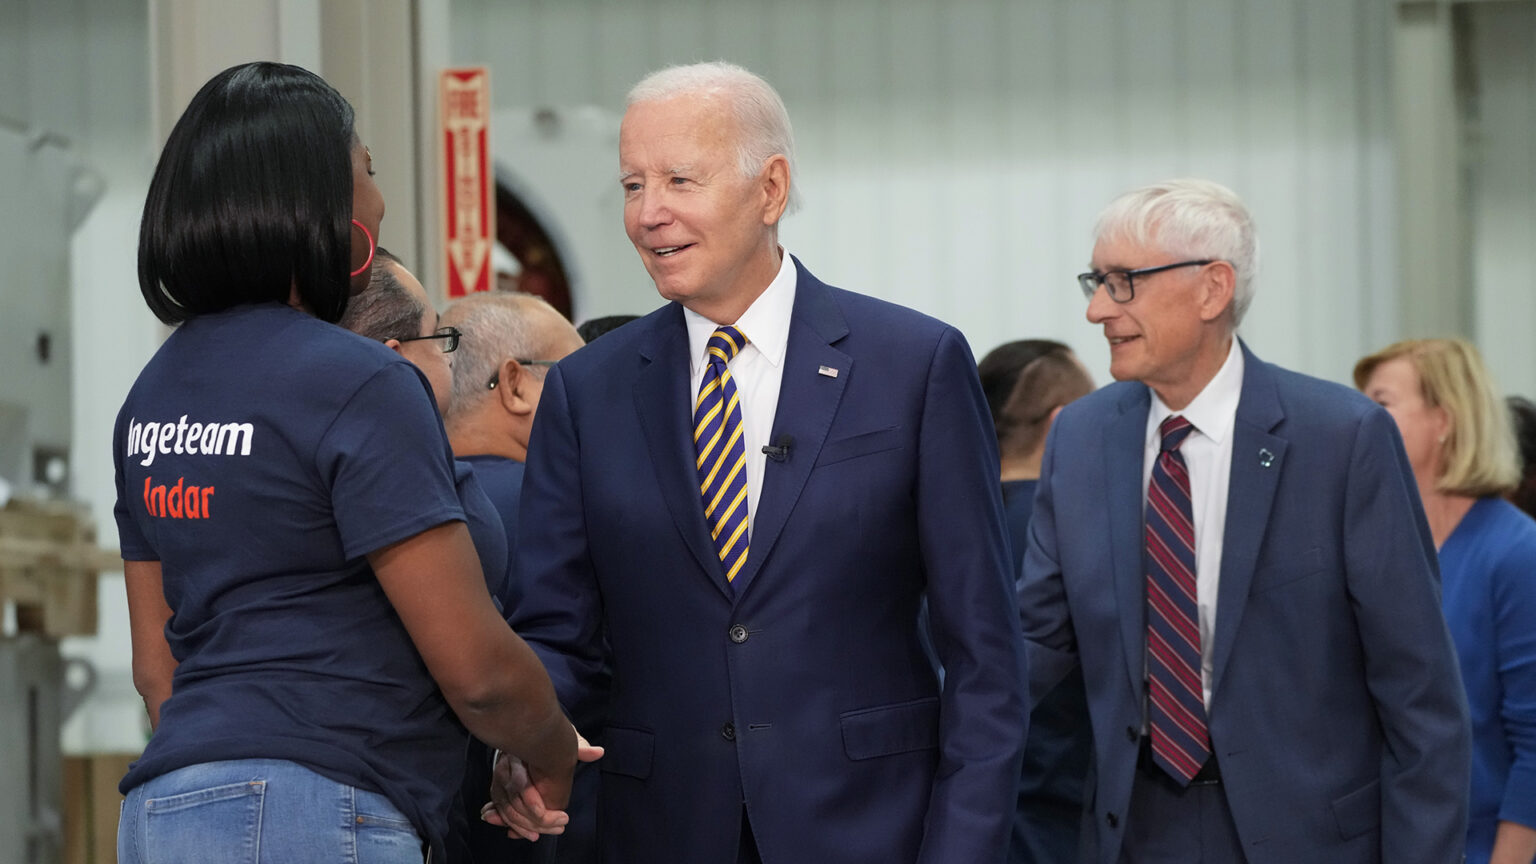 Joe Biden and Tony Evers share the hands of a line of people facing them, in a room with corrugated metal walls and industrial equipment.